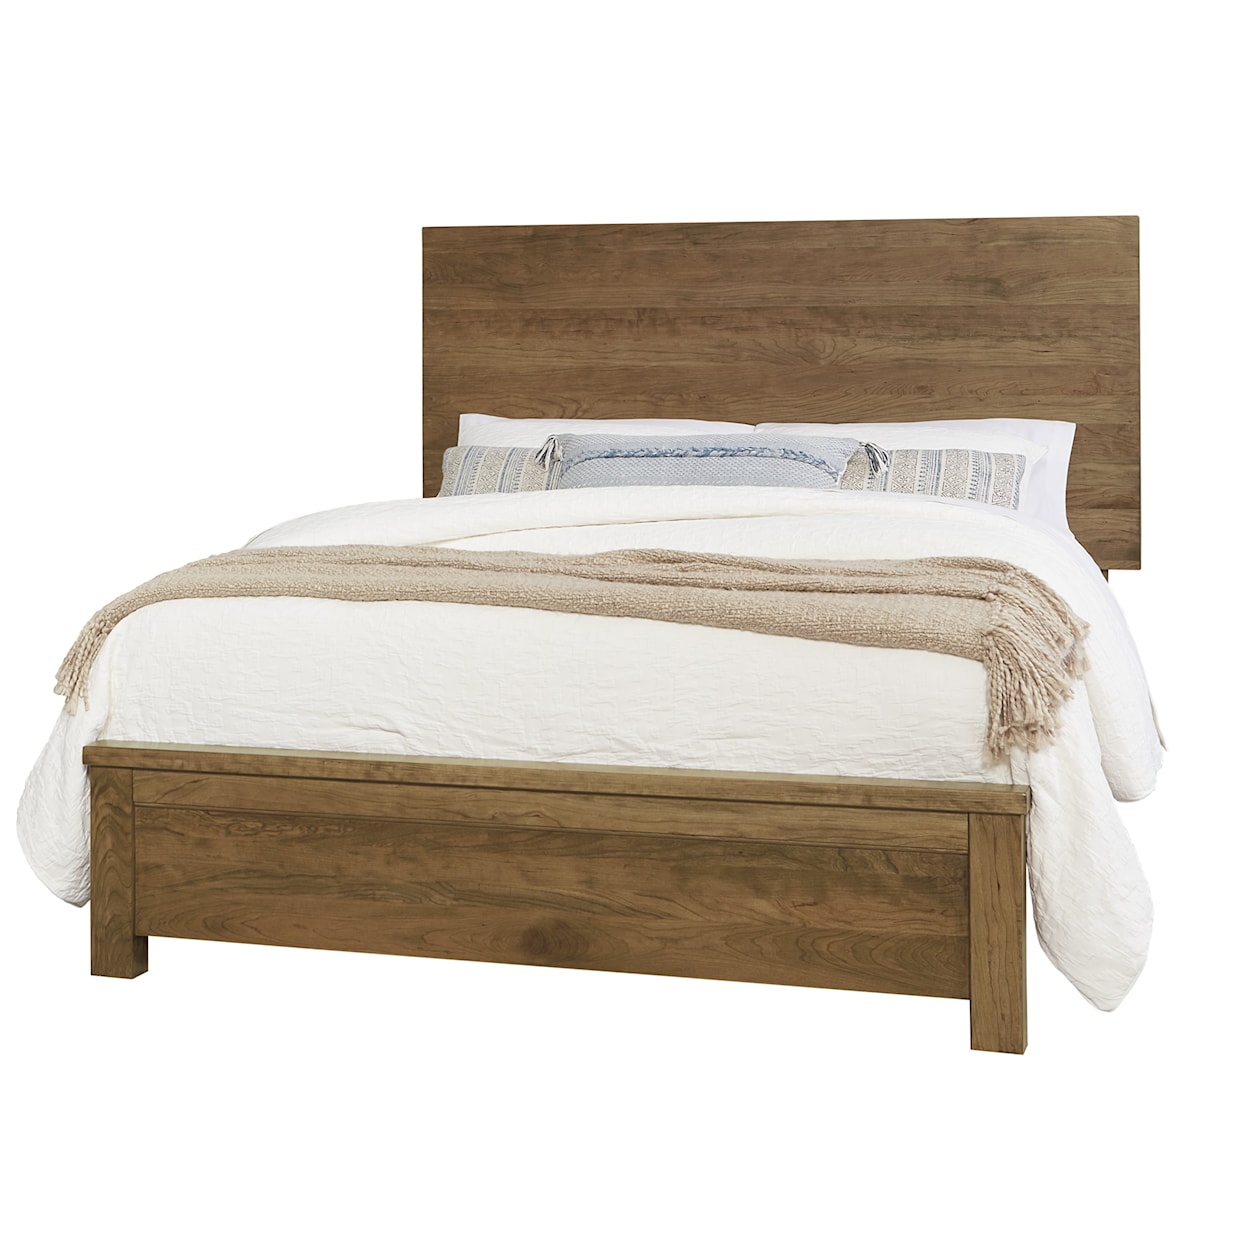 Virginia House Crafted Cherry - Medium QUEEN PLANK BED